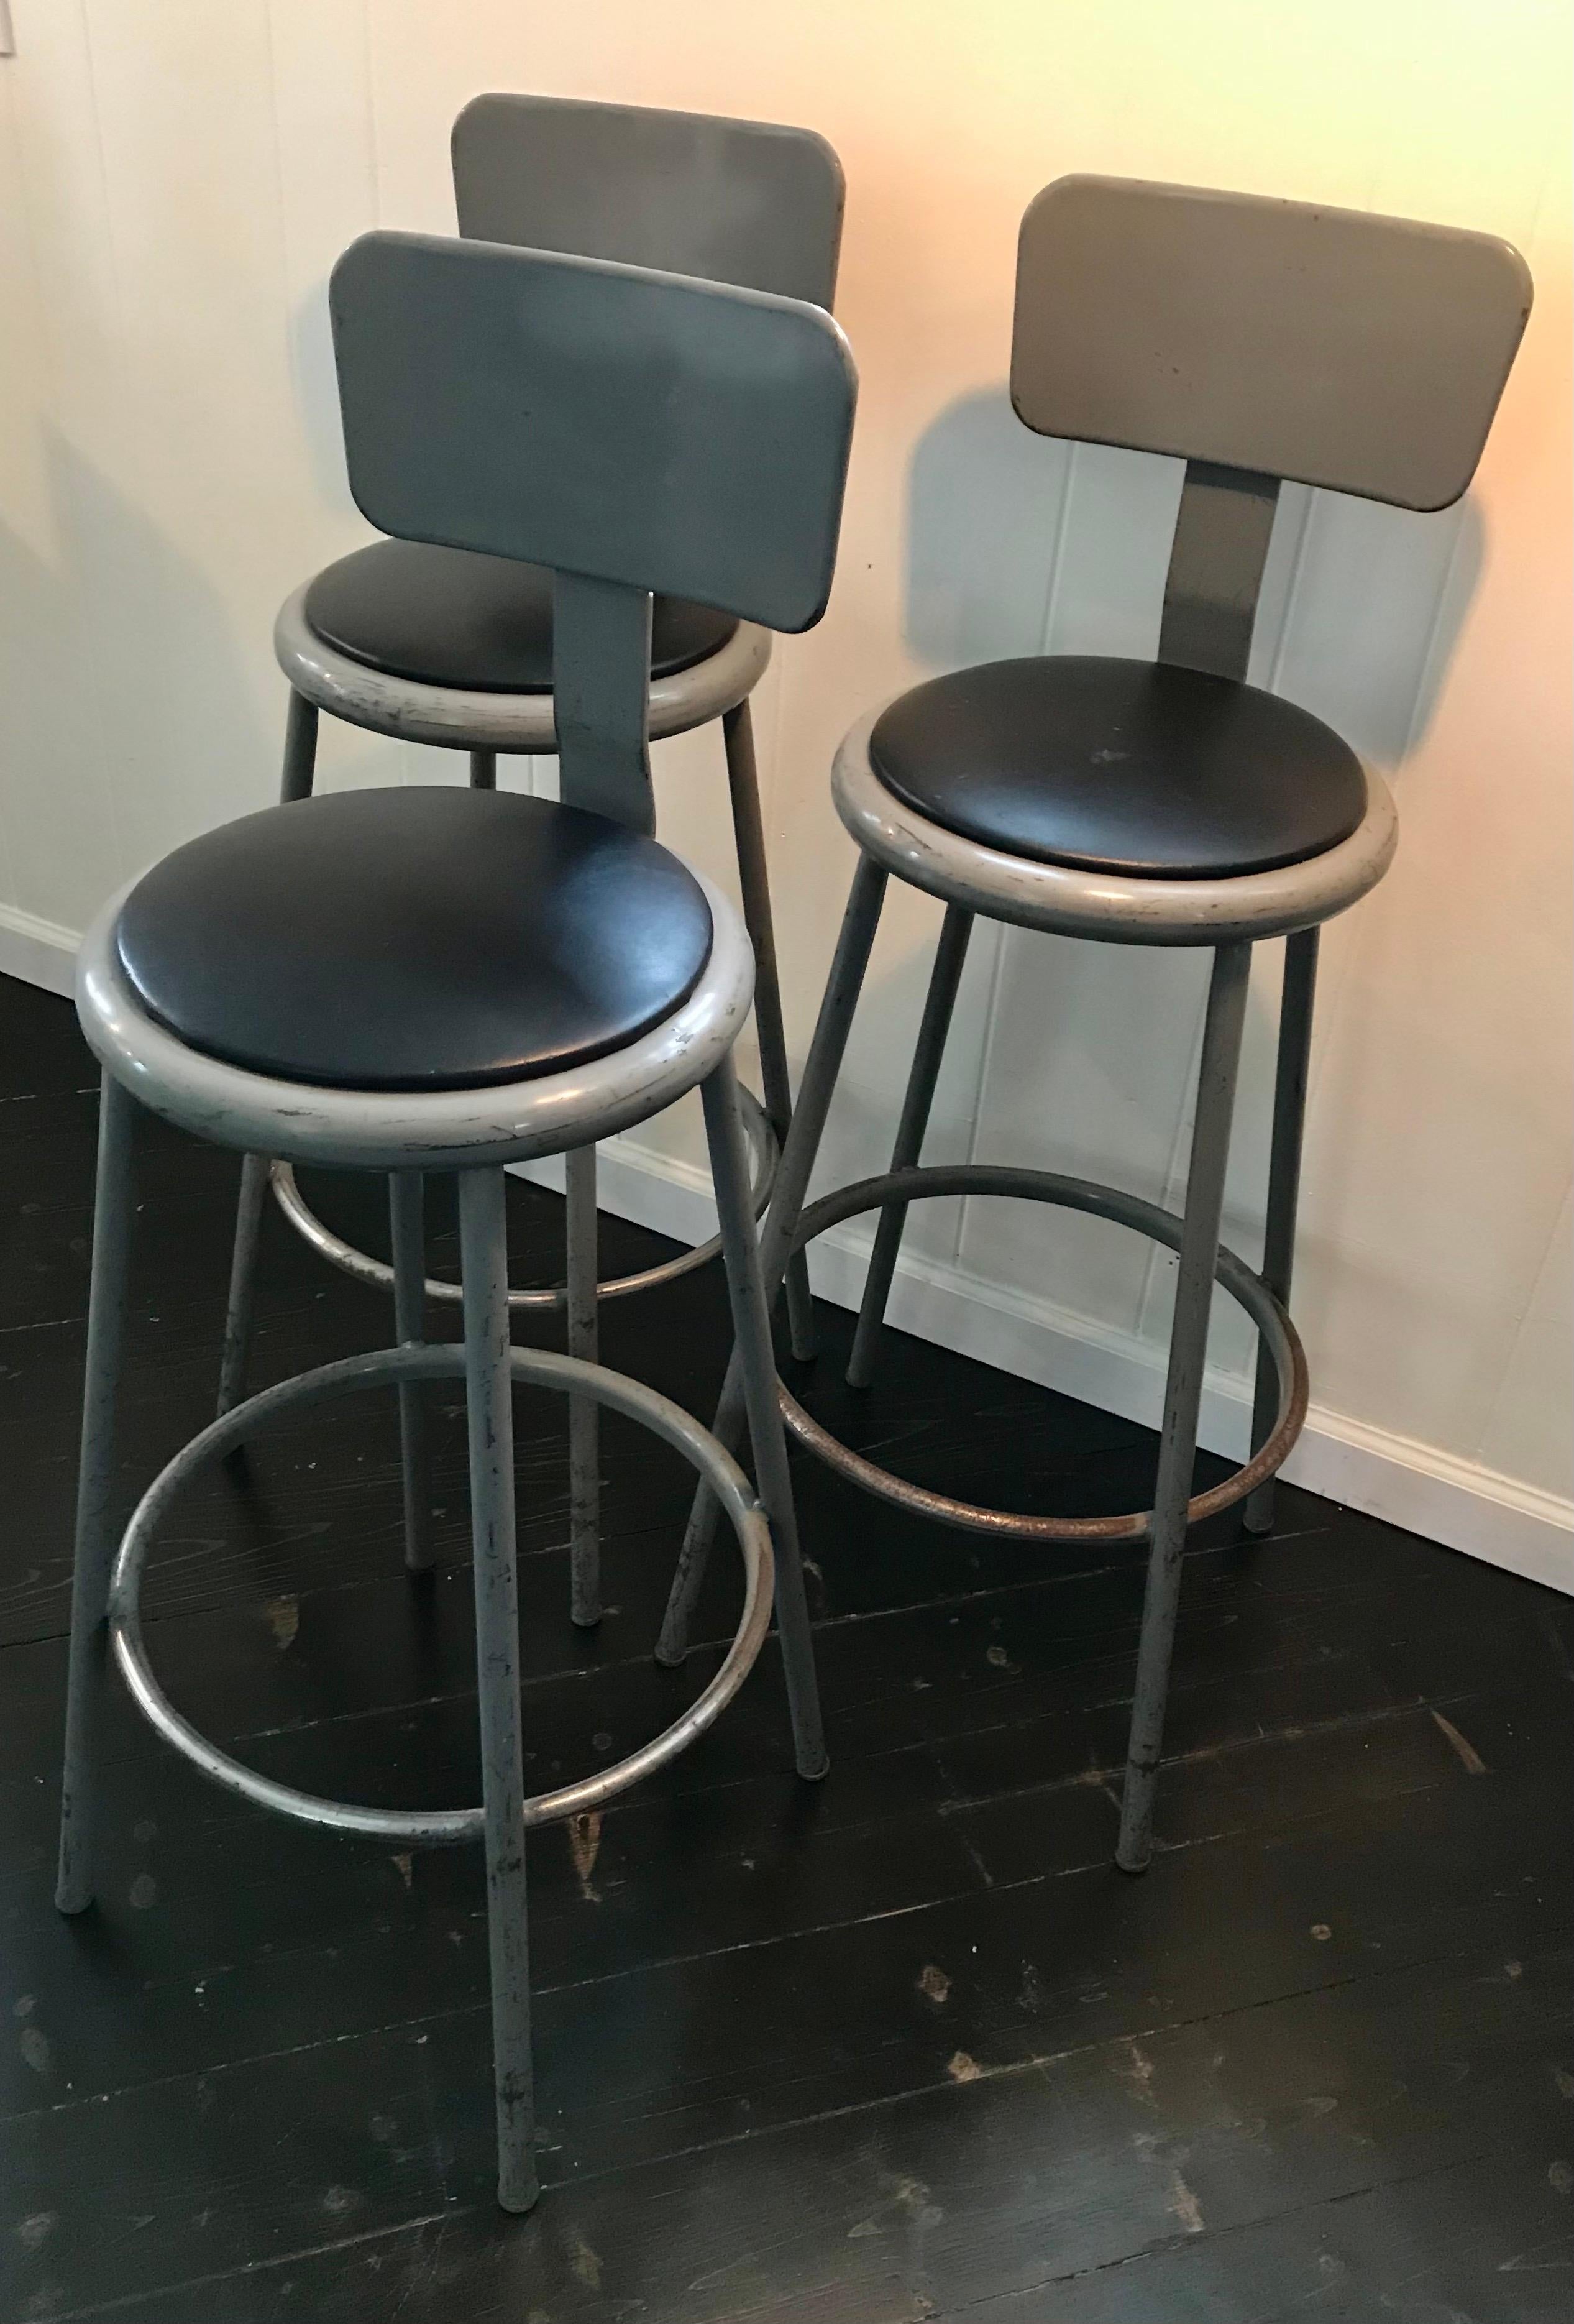 Authentic set of three Industrial bar height stools with back rests, round black vinyl seats. All original and very sturdy, wear appropriate with use, very cool. Made by Inter Royal Corporation, USA.